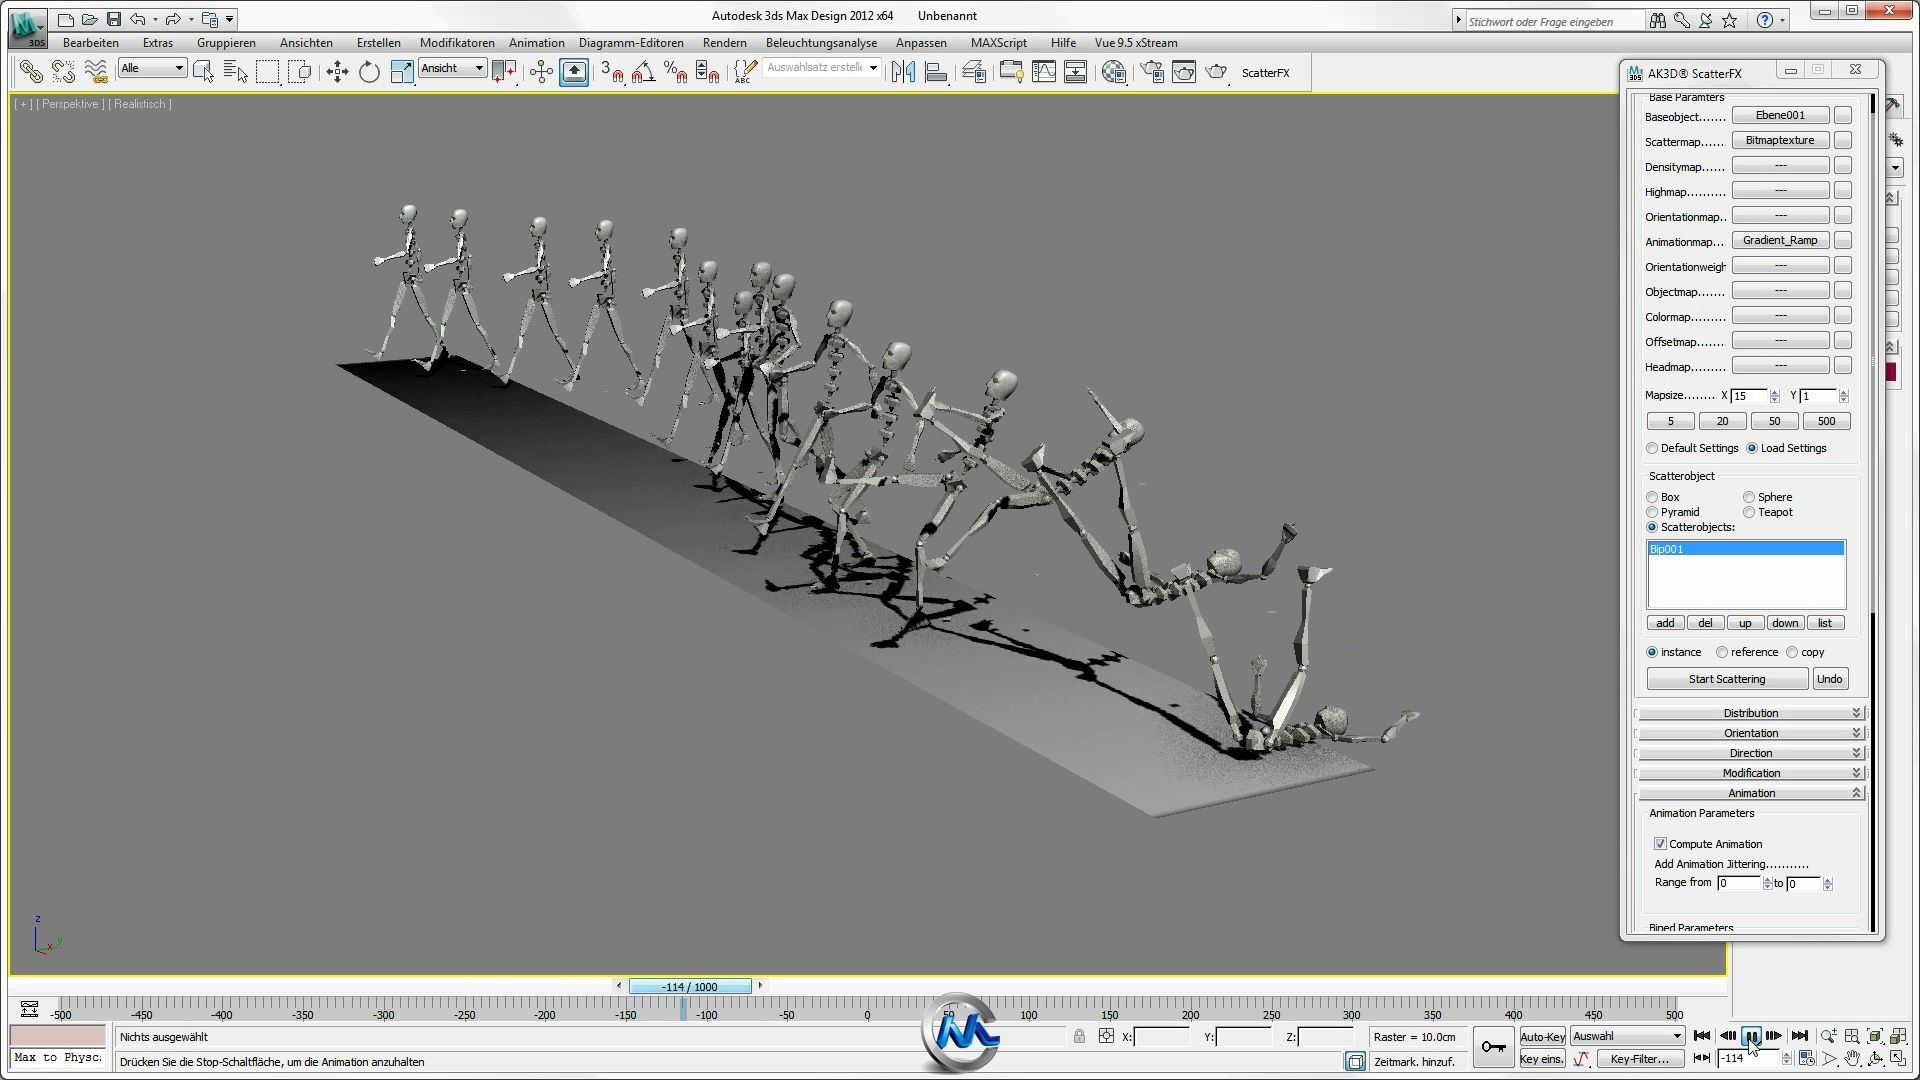 《3dsmax散射离散脚本》AK3D ScatterFX for 3ds Max